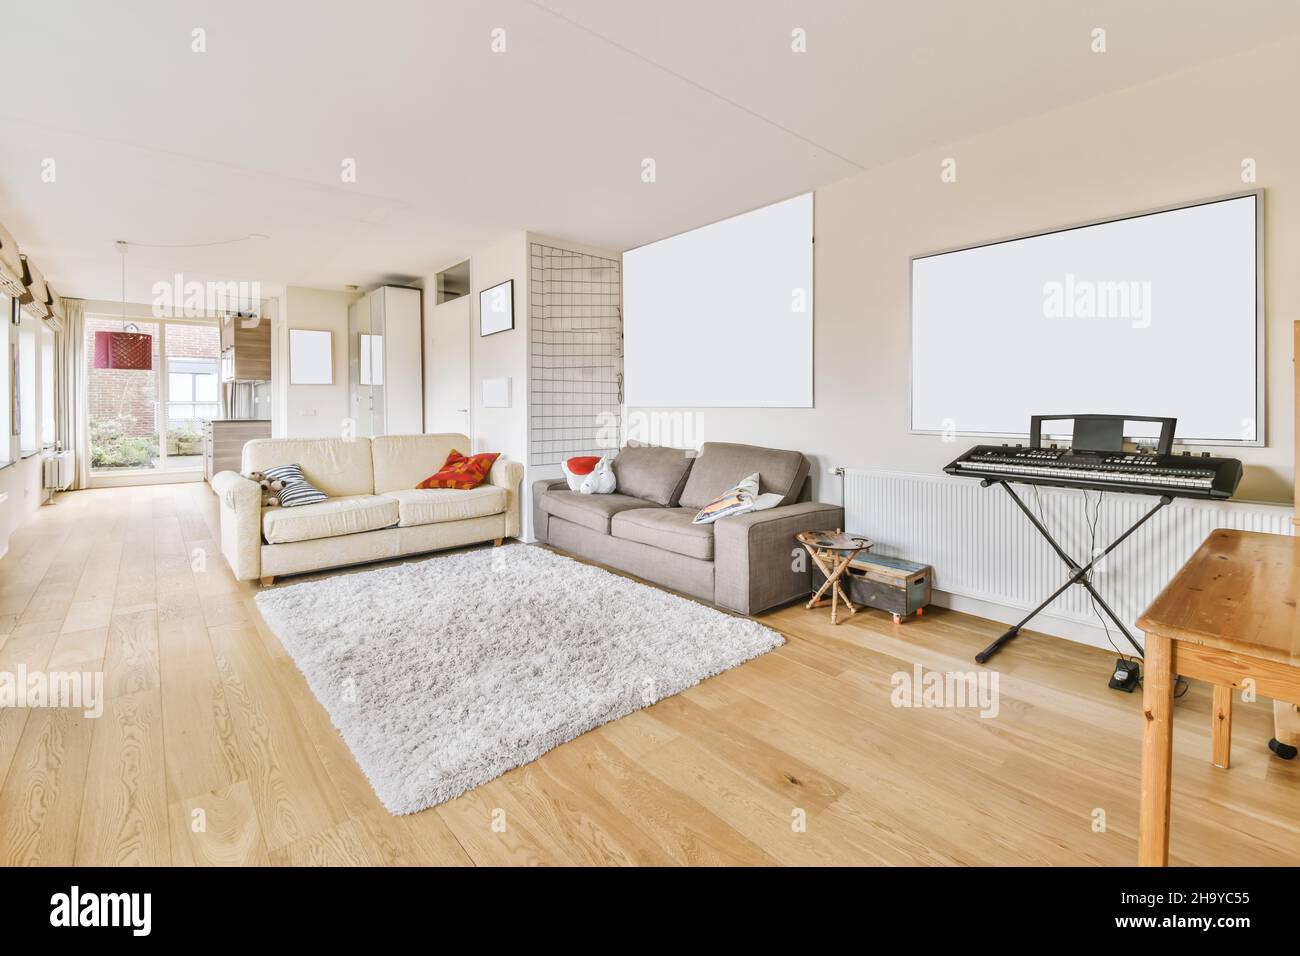 Lovely living room with milky and gray sofas and shaggy carpet Stock Photo